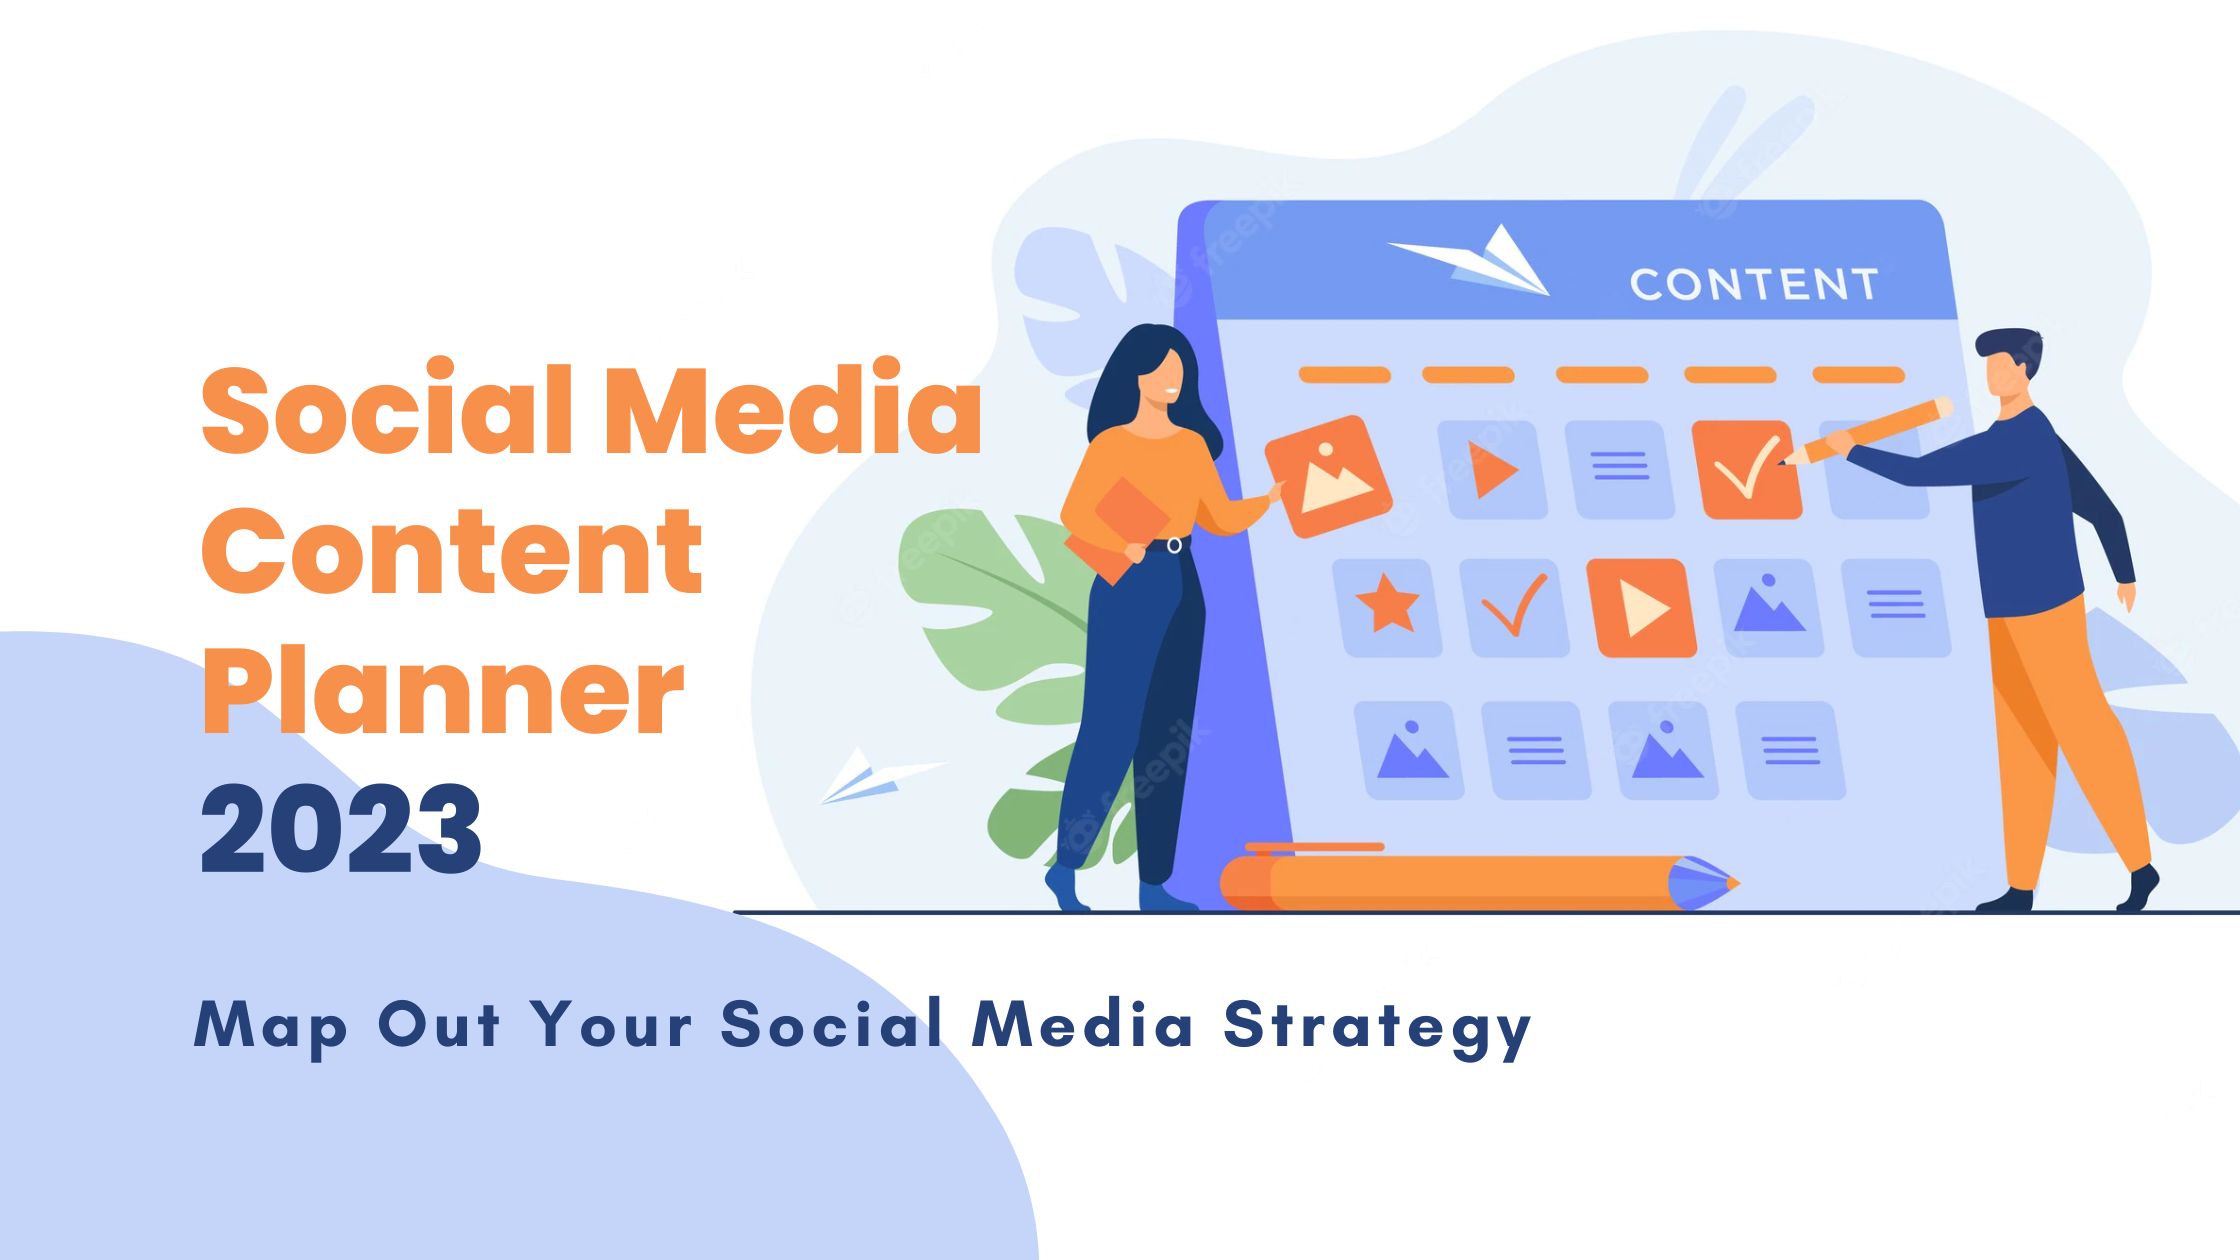 Social Media Content Planner 2023 - Map Out Your Social Media Strategy